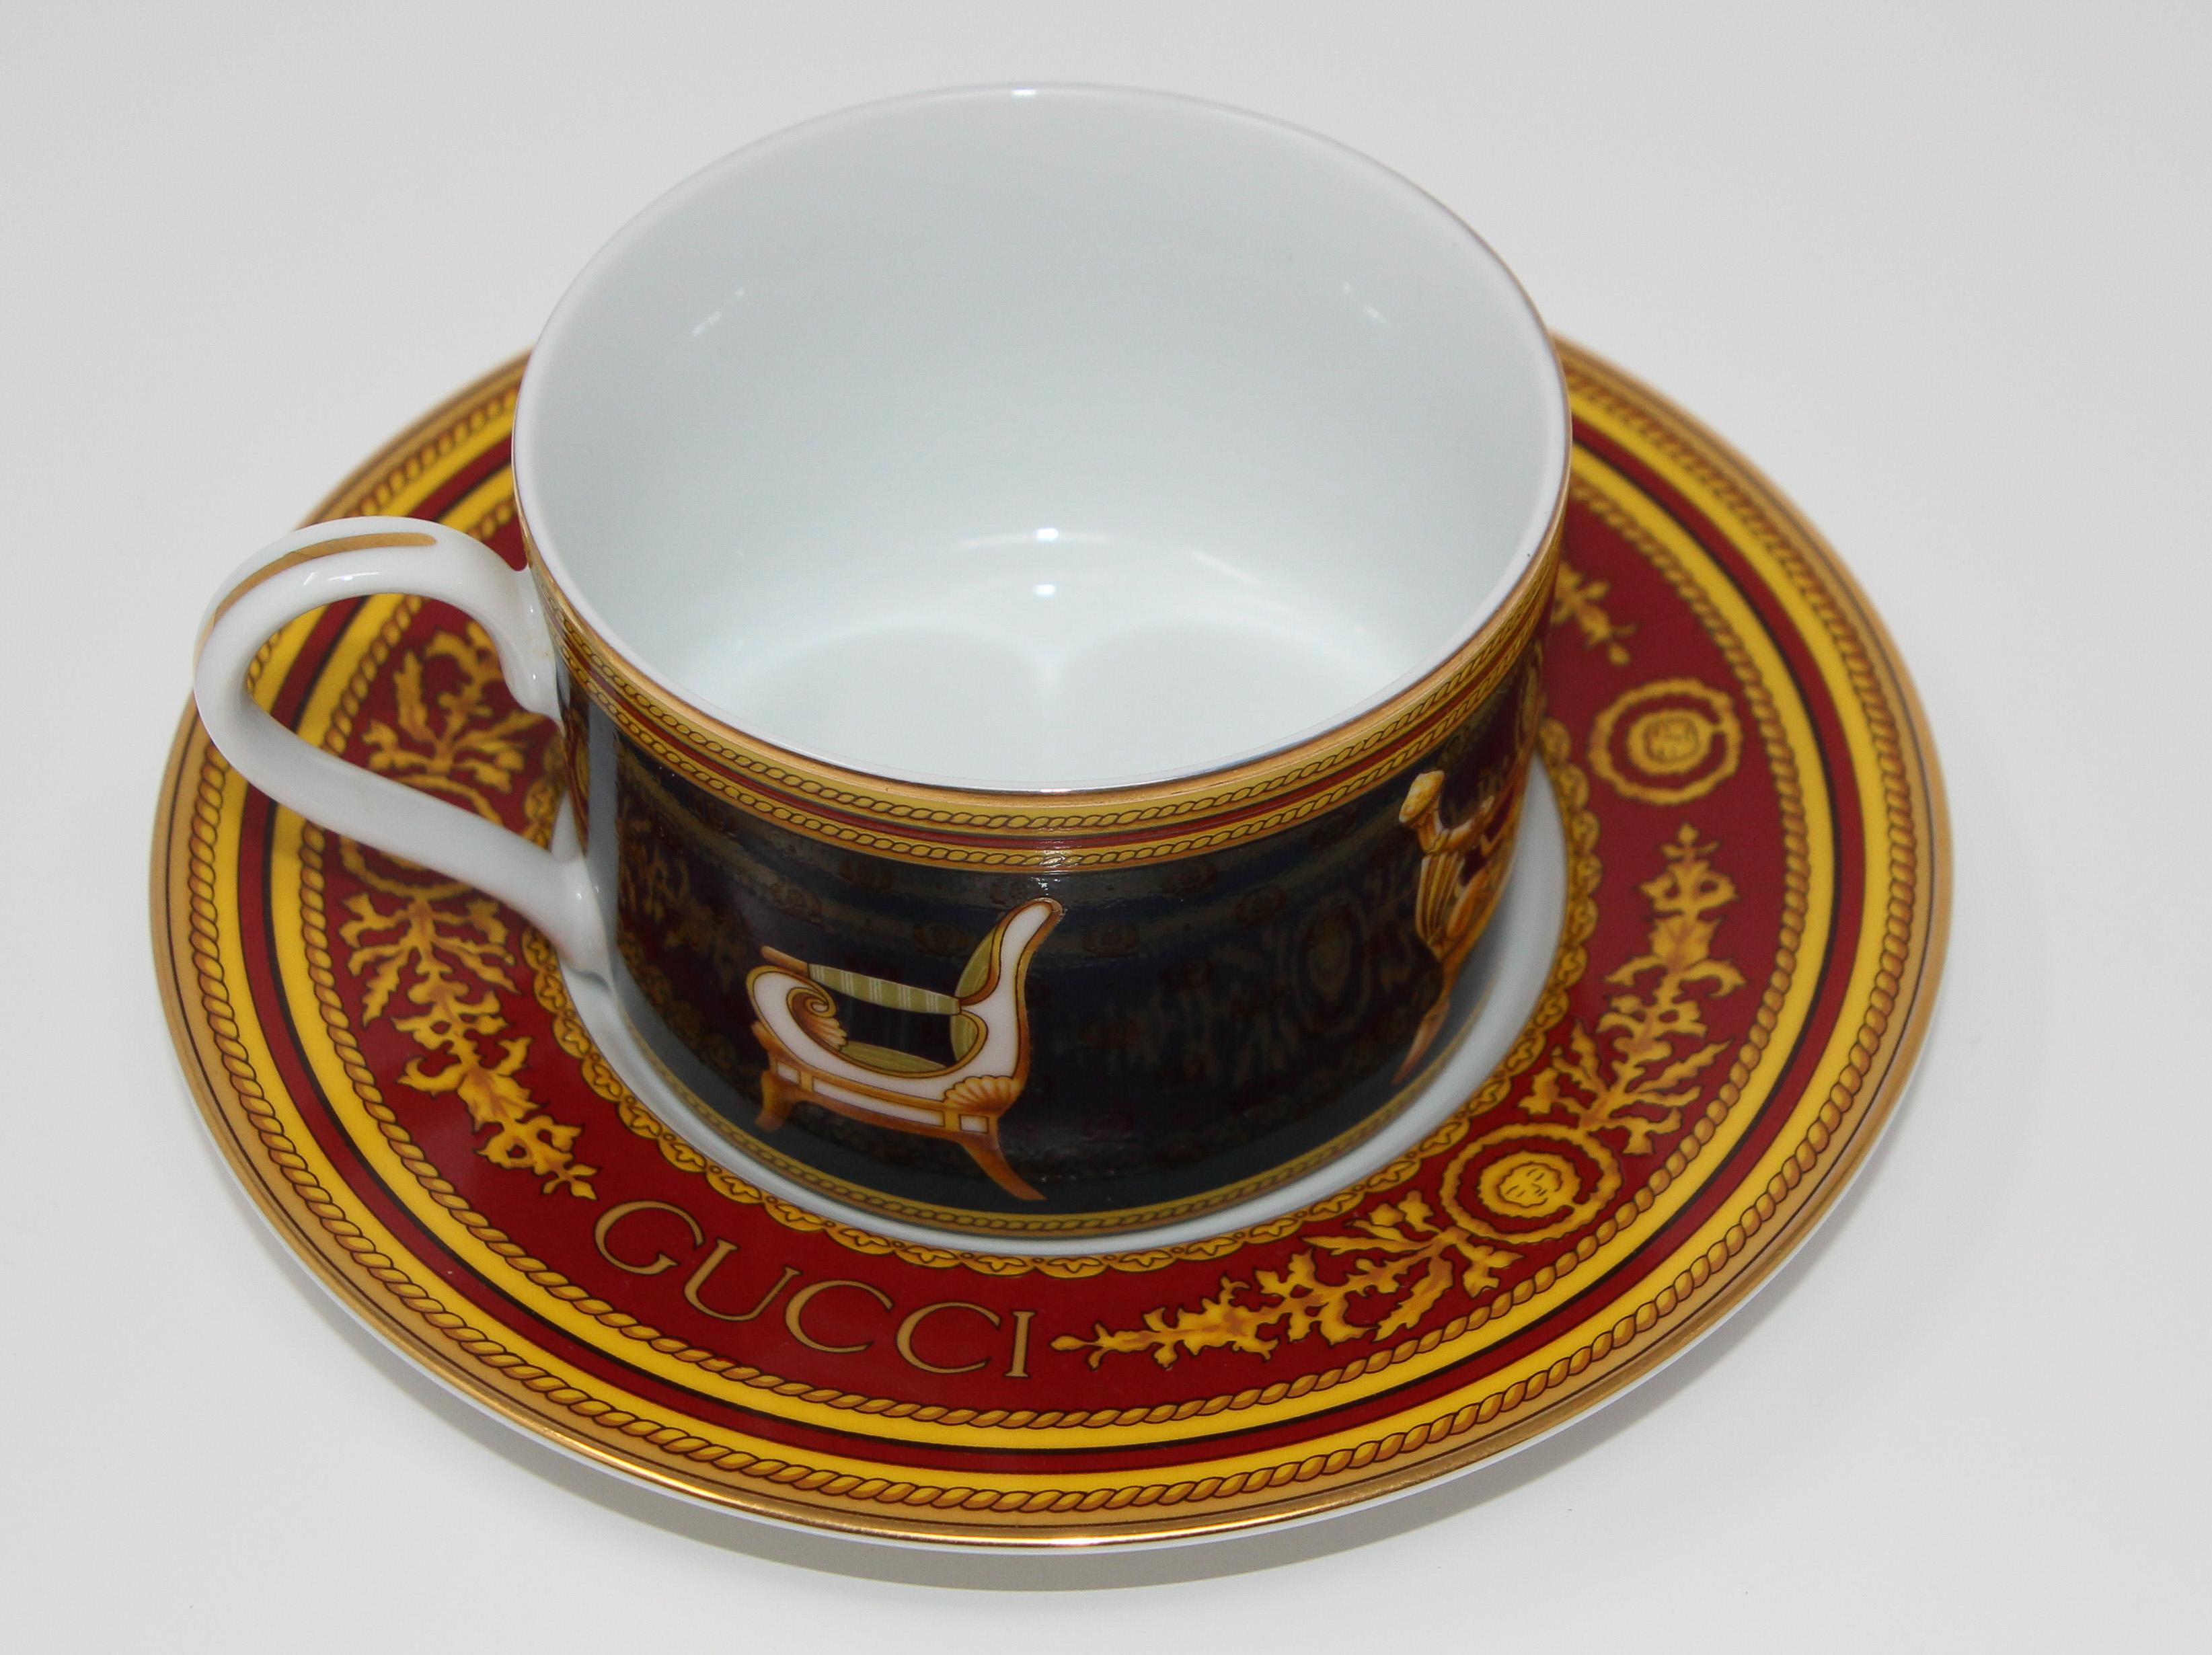 Empire Gucci Porcelain Tea Cups and Saucers Set of 2